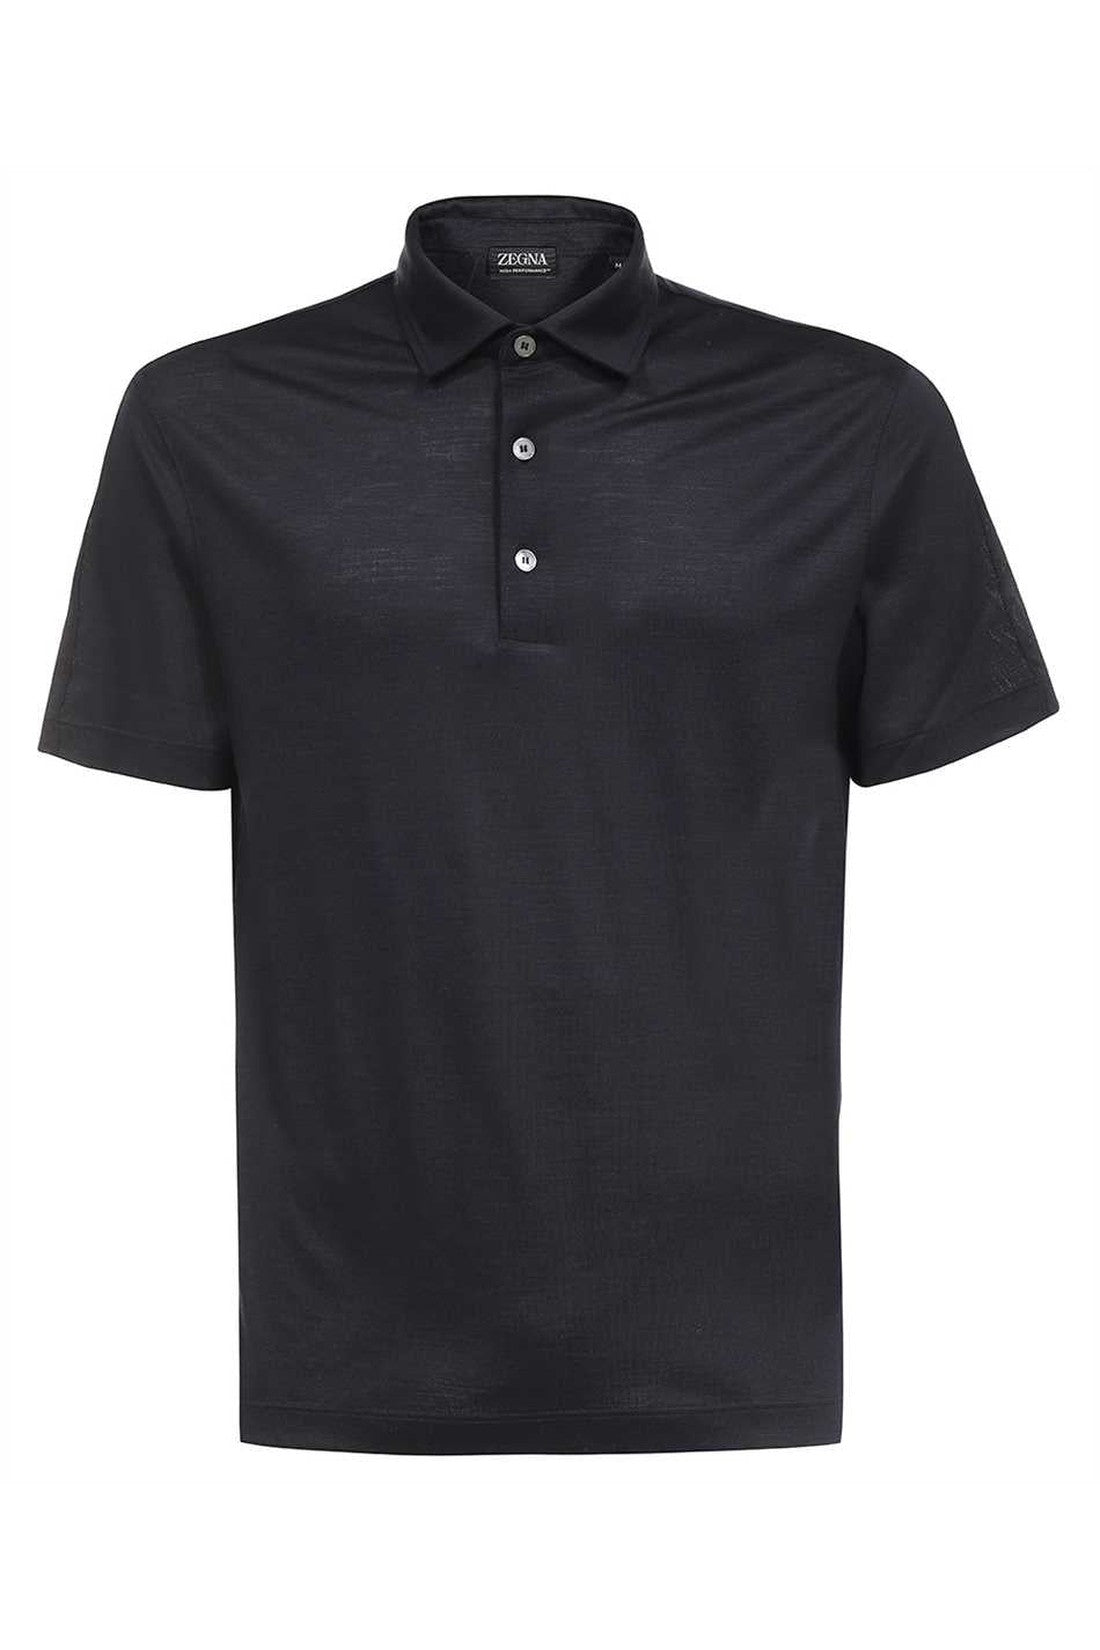 Zegna-OUTLET-SALE-Short-sleeve-polo-shirt-Shirts-3XL-ARCHIVE-COLLECTION.jpg